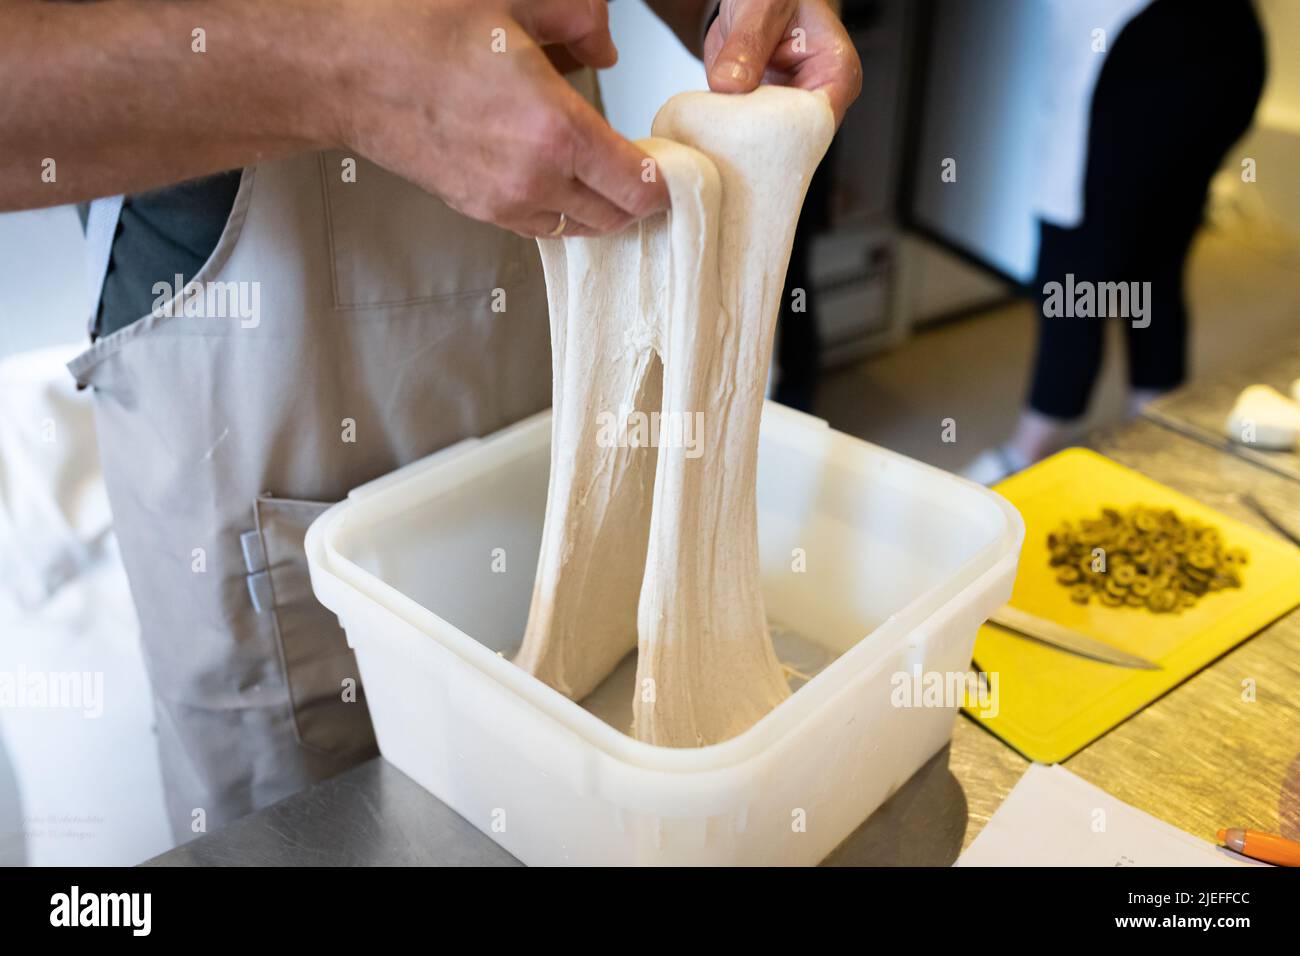 The process of making wheat bread in an artisan bakery. The folding of the dough during fermentation. Front view. Stock Photo